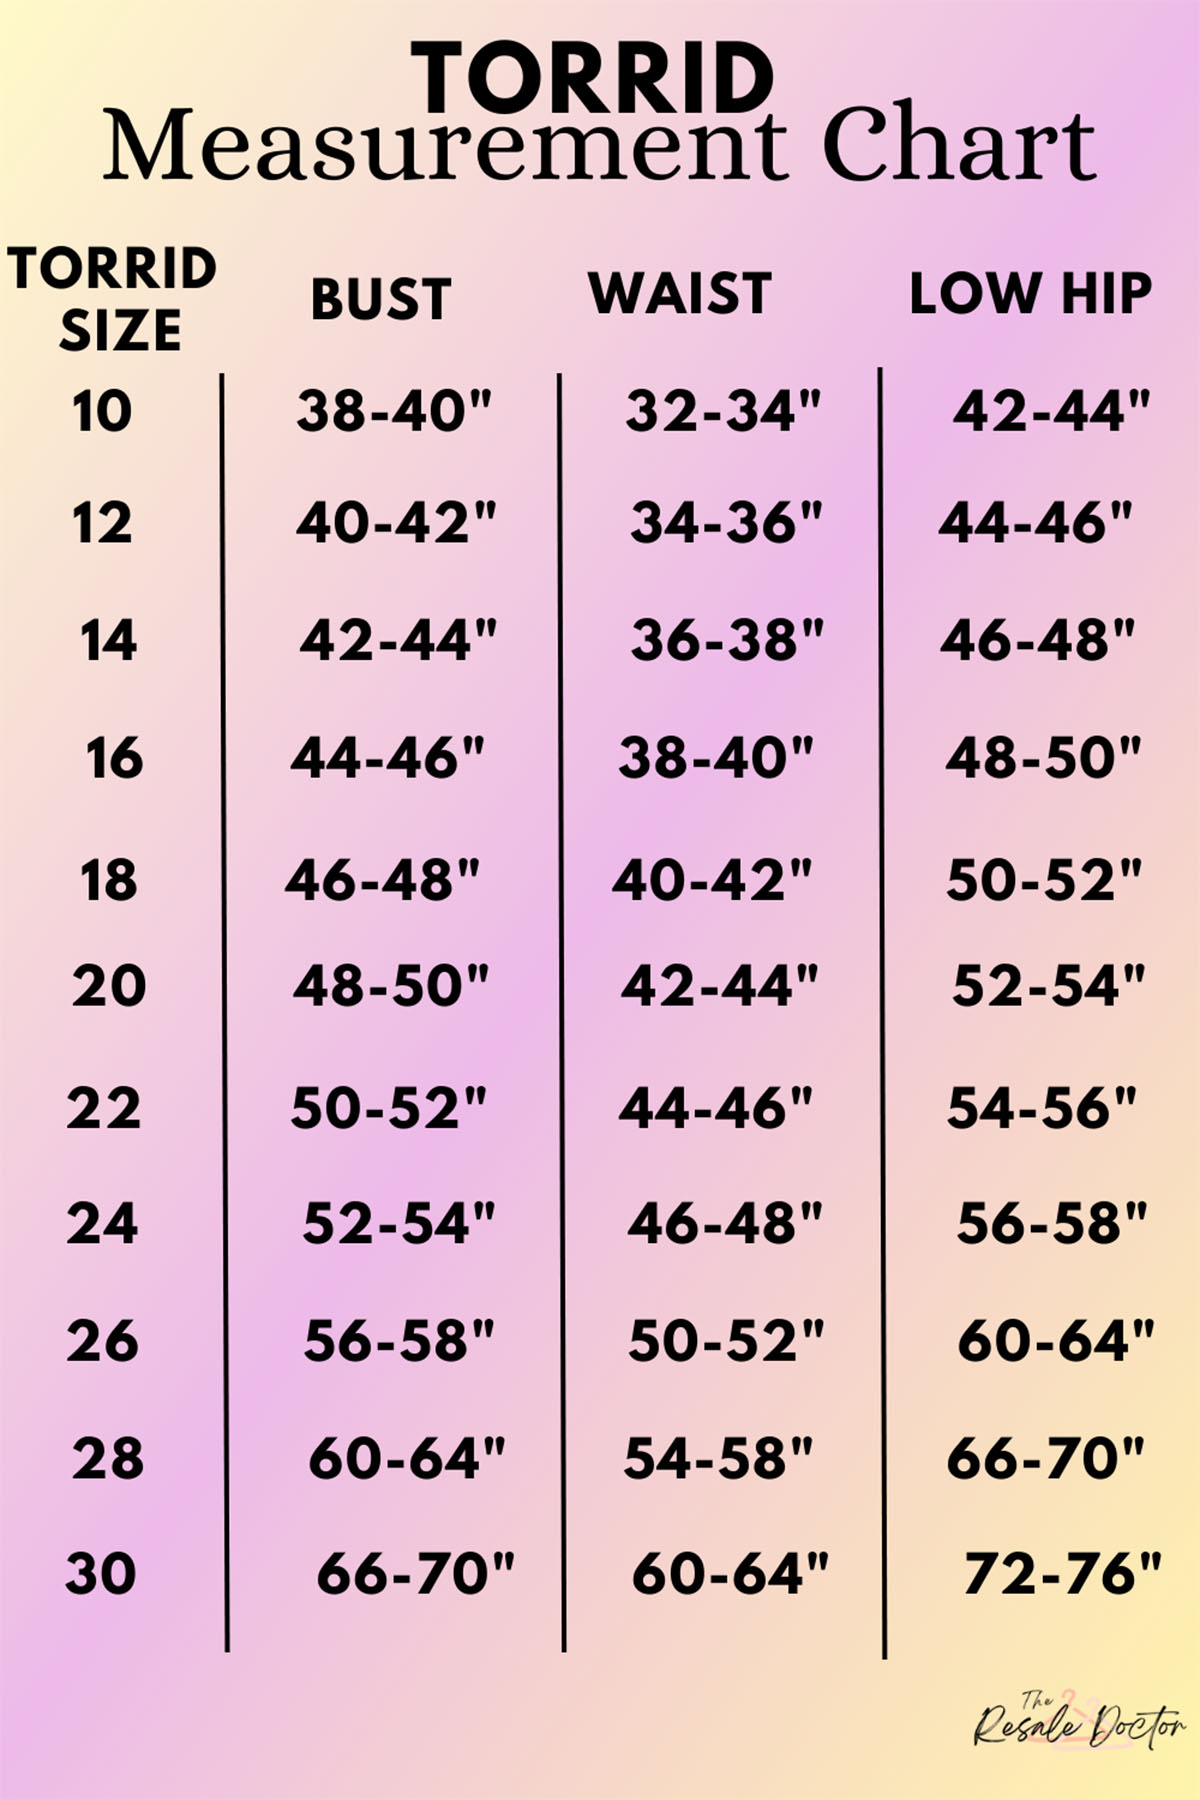 a torrid measurement chart with the torrid size, bust measurement, waist measurement, and hip measurement.